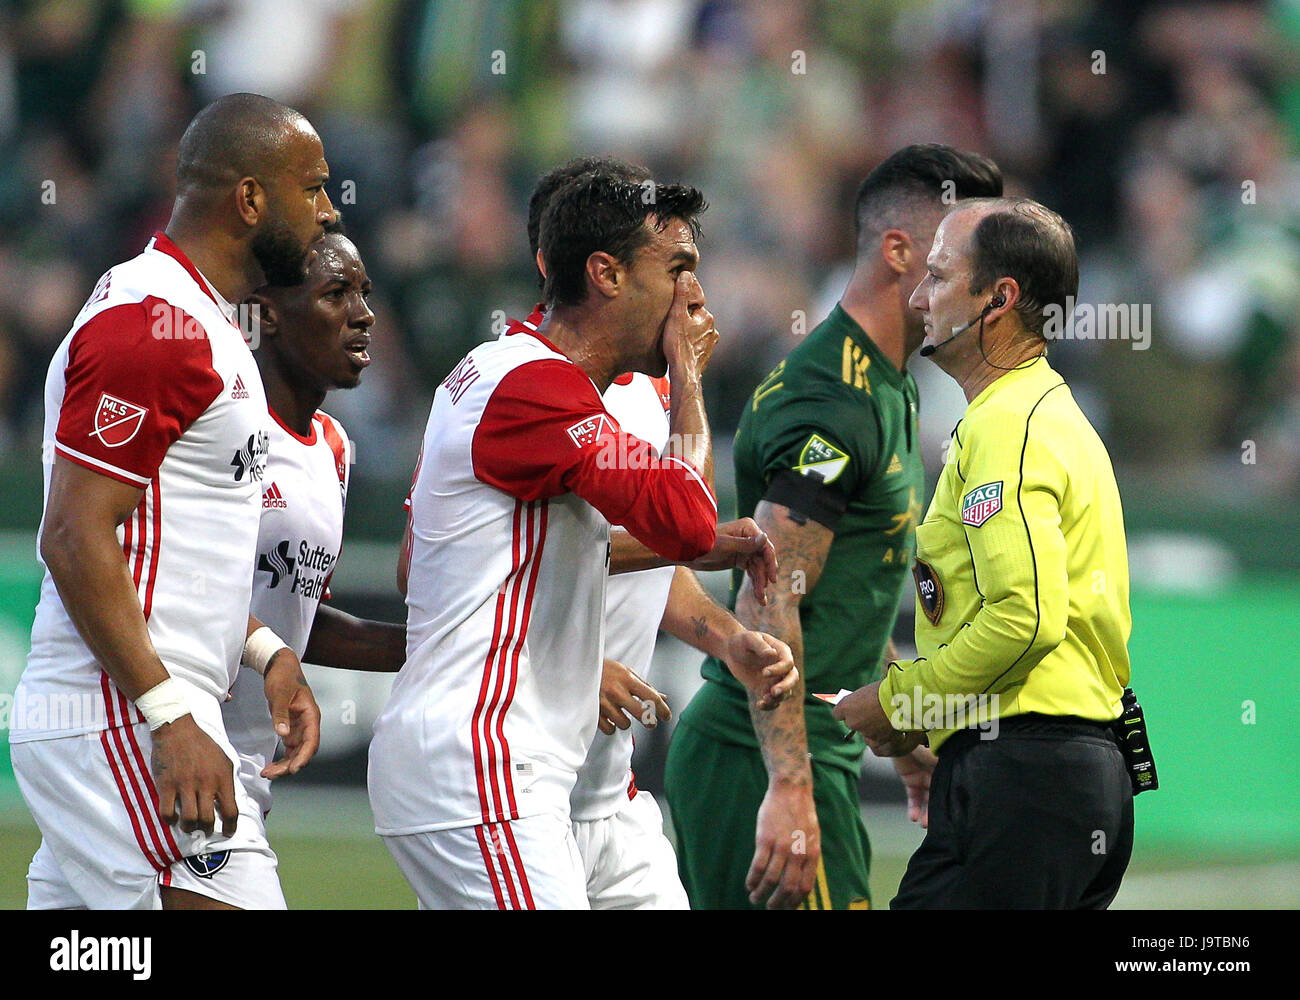 June 02, 2017. San Jose Earthquakes forward Chris Wondolowski (8) can't believe the call the referee made during the MLS match between the visiting New England Revolution and the Portland Timbers at Providence Park, Portland, OR. Larry C. Lawson/CSM Stock Photo